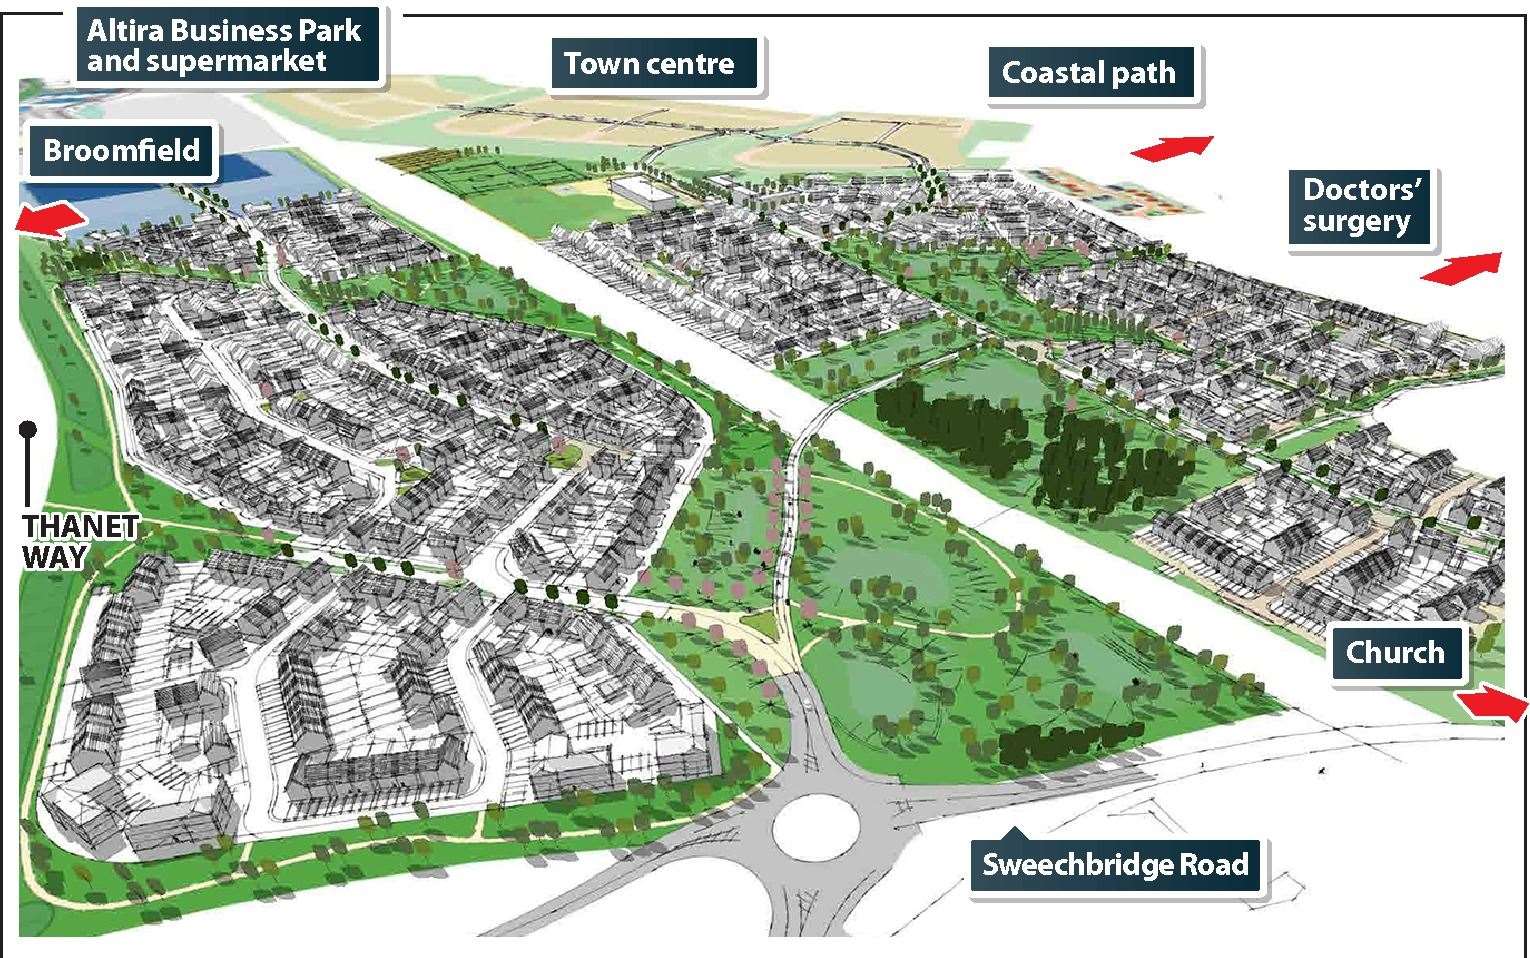 The plans for 900 homes near Herne Bay